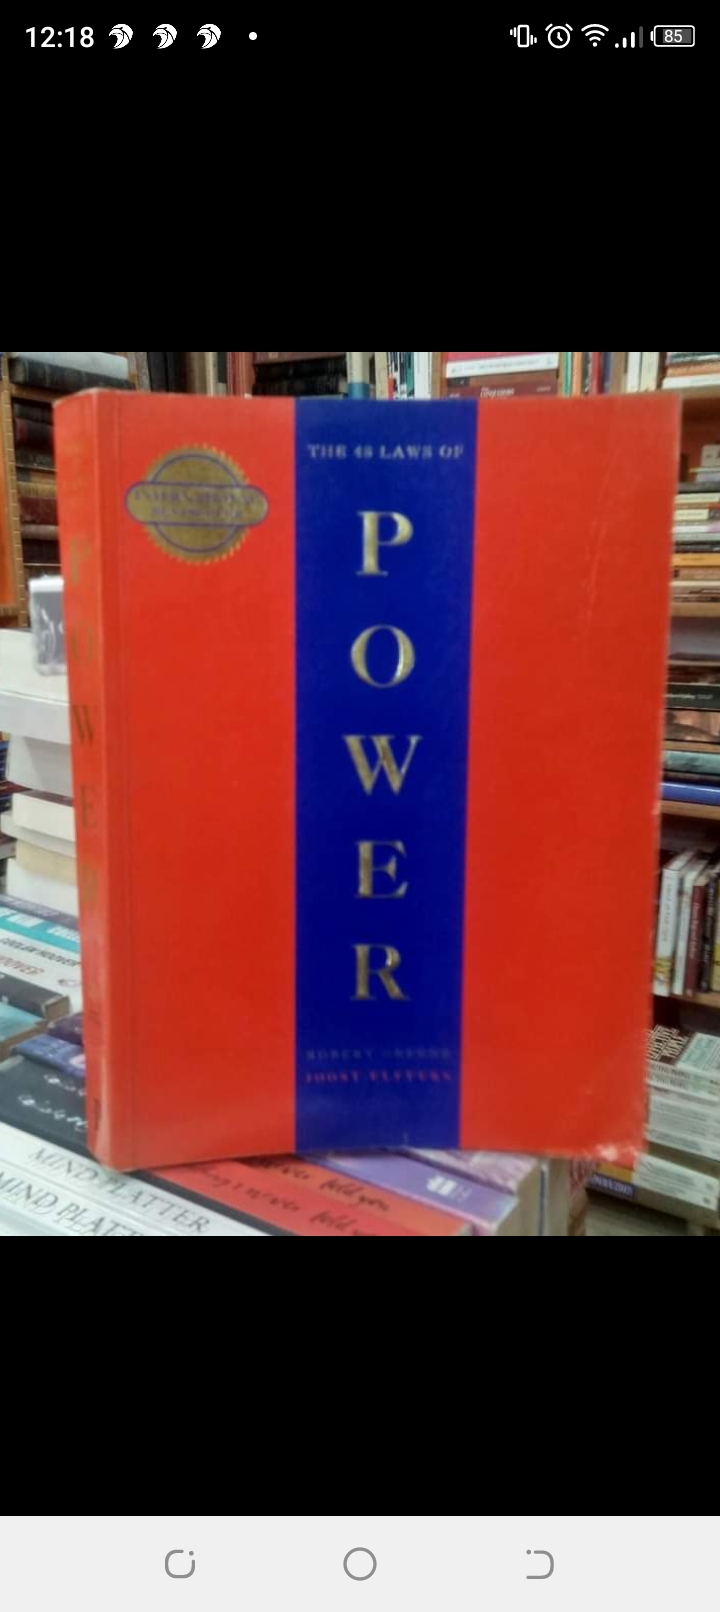 the 48laws of power